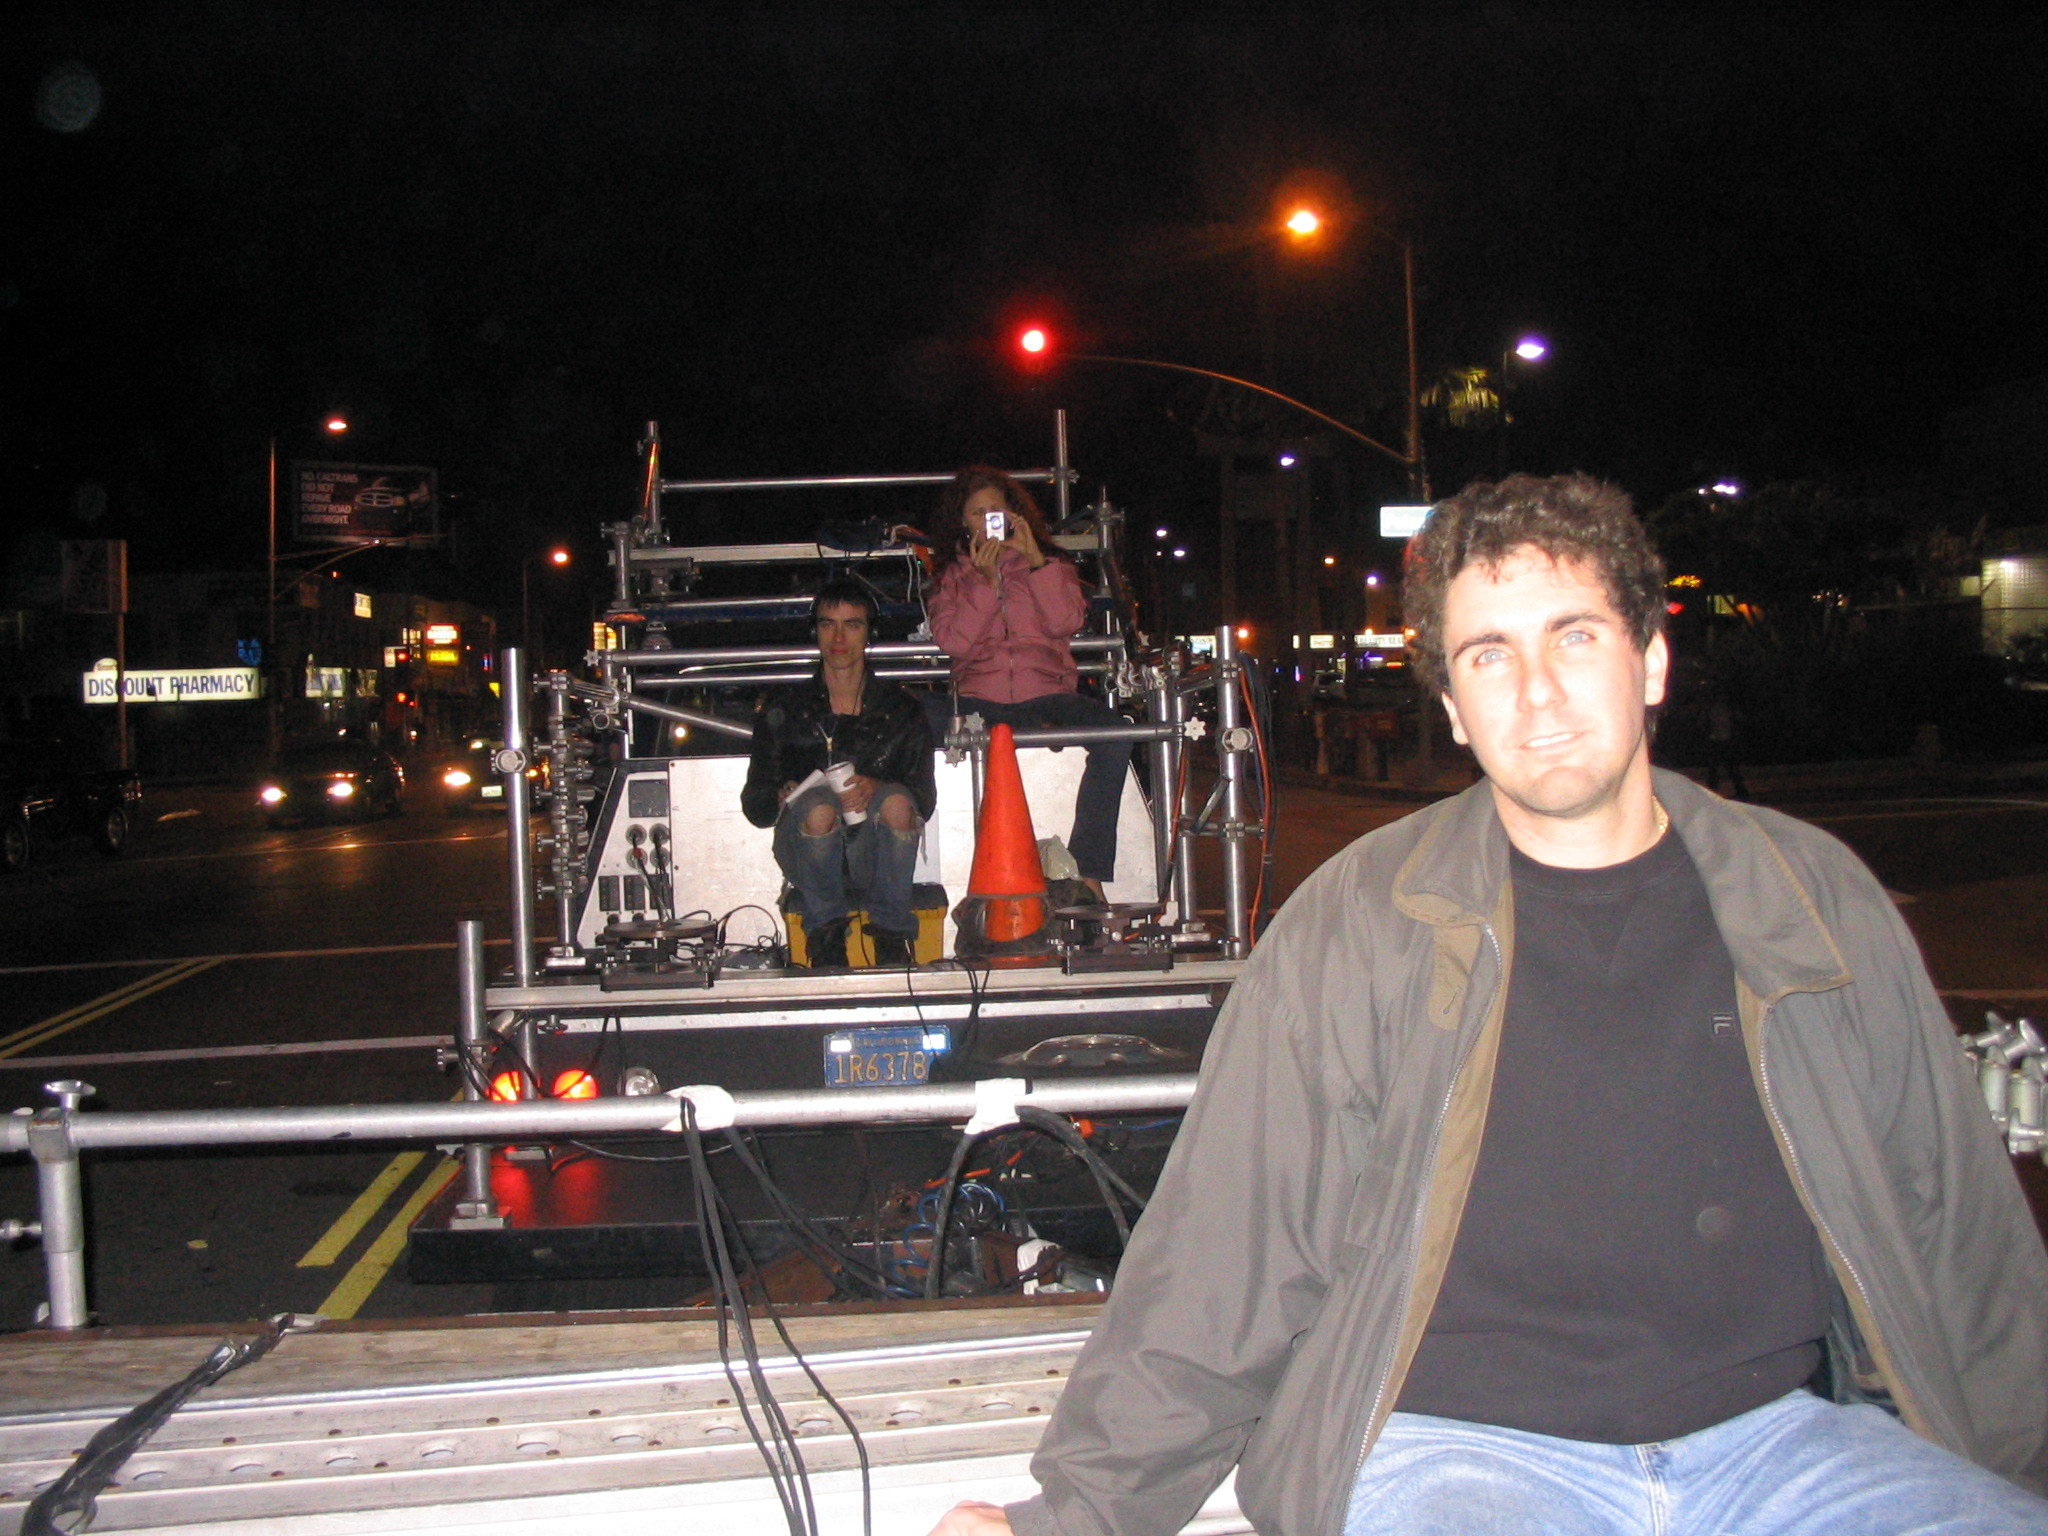 Process trailer night on the streets of Hollywood, 